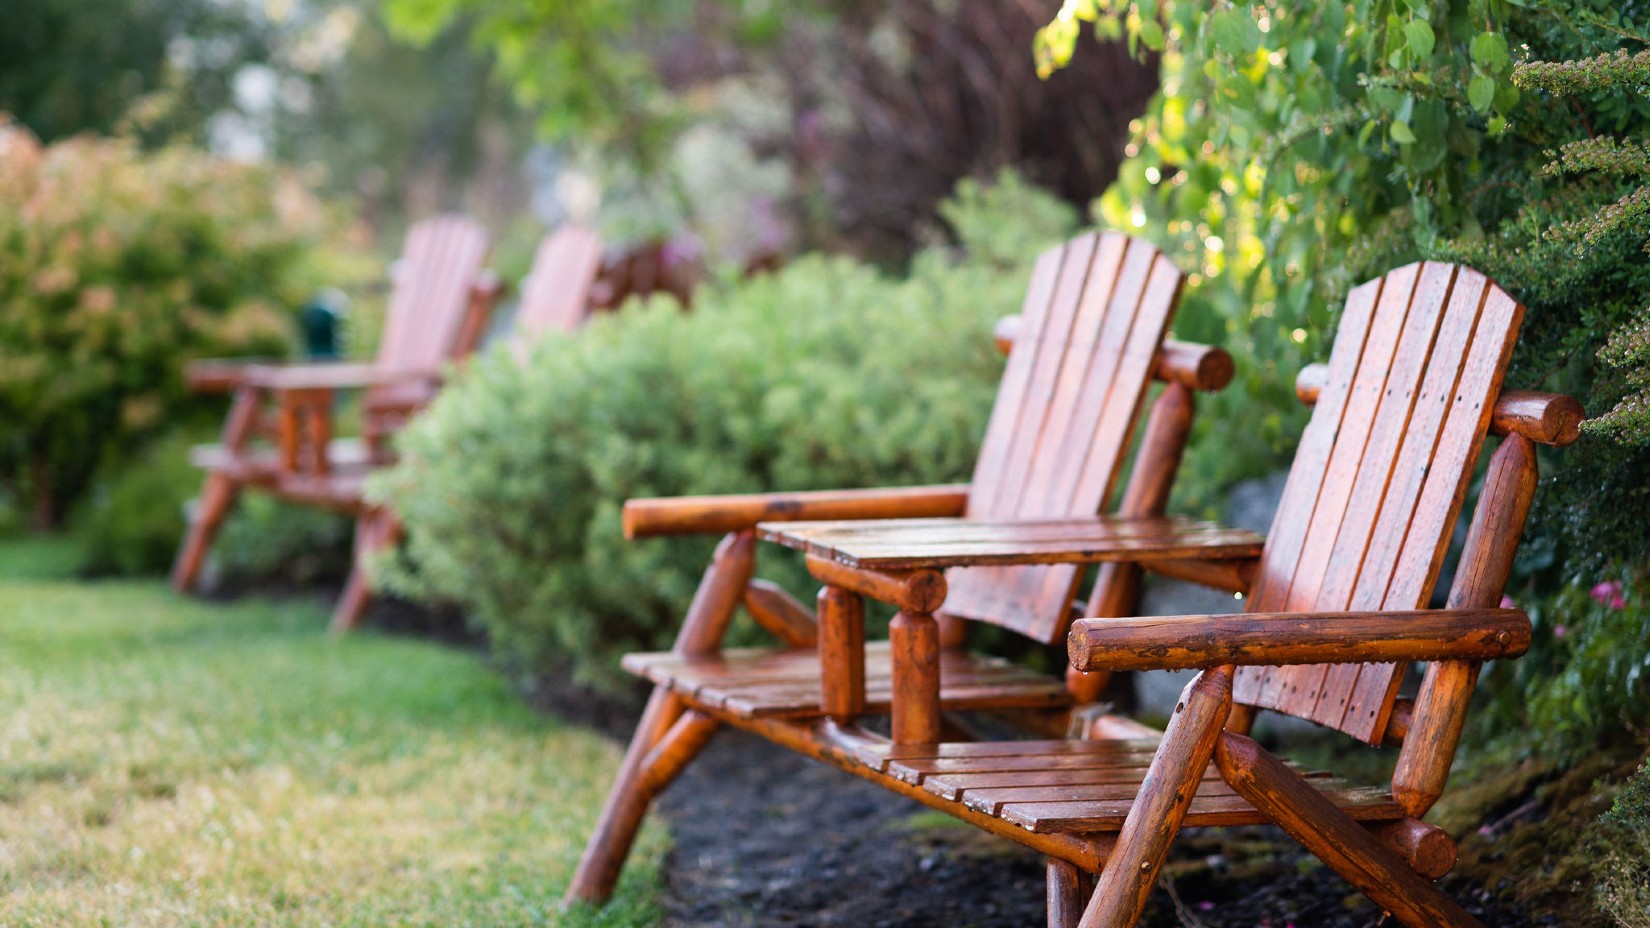 Wooden Chairs on the Lawn